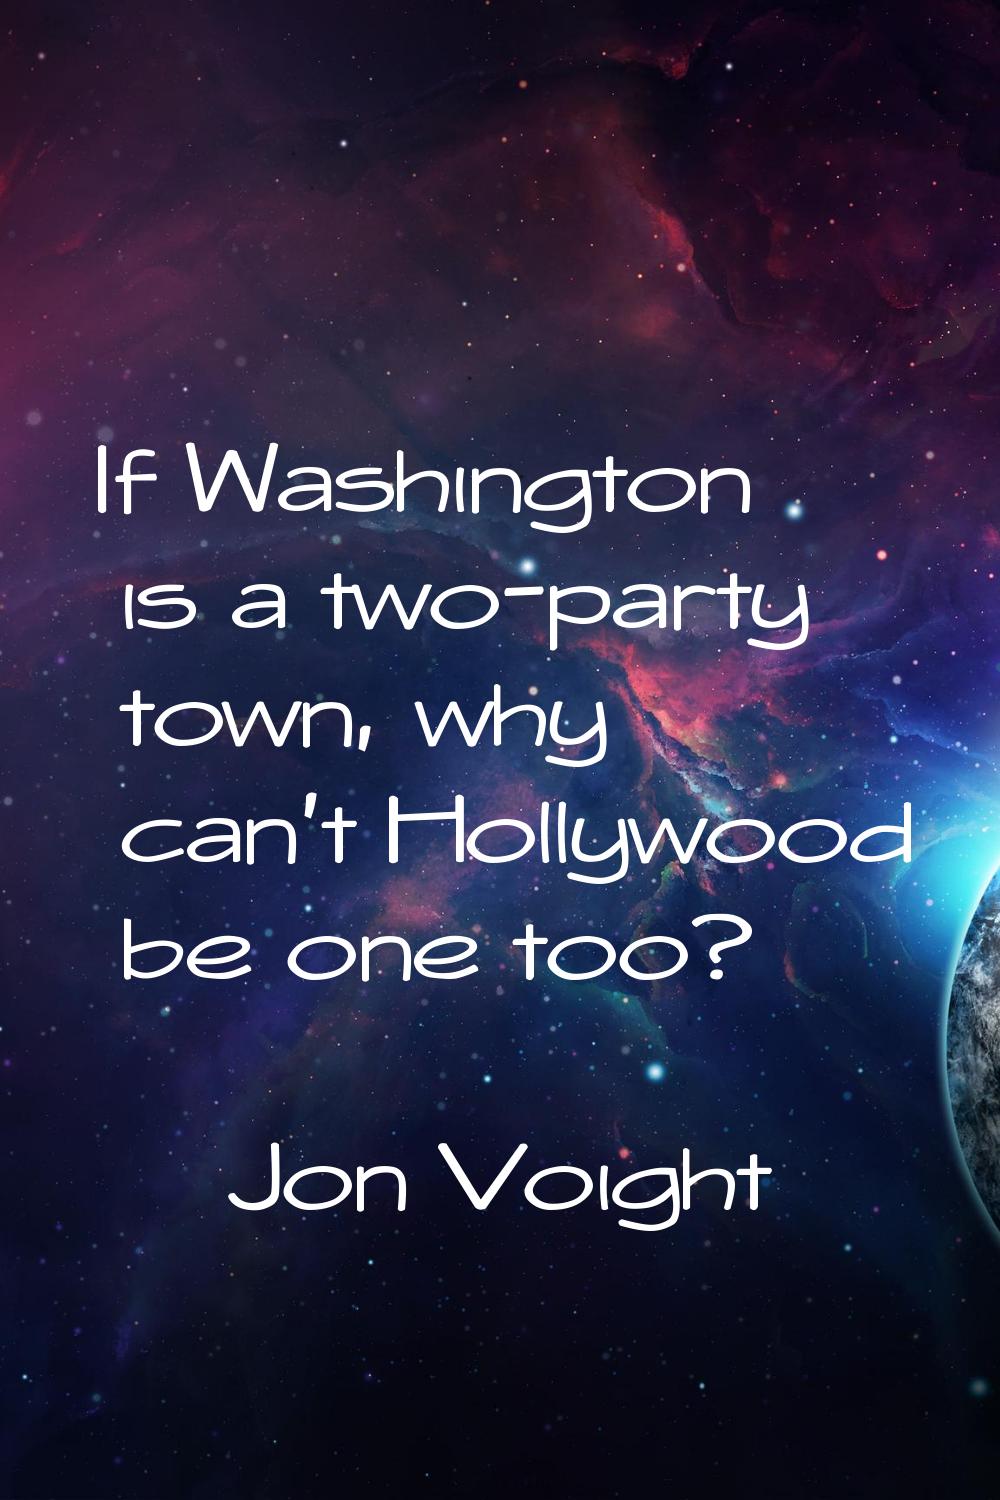 If Washington is a two-party town, why can't Hollywood be one too?